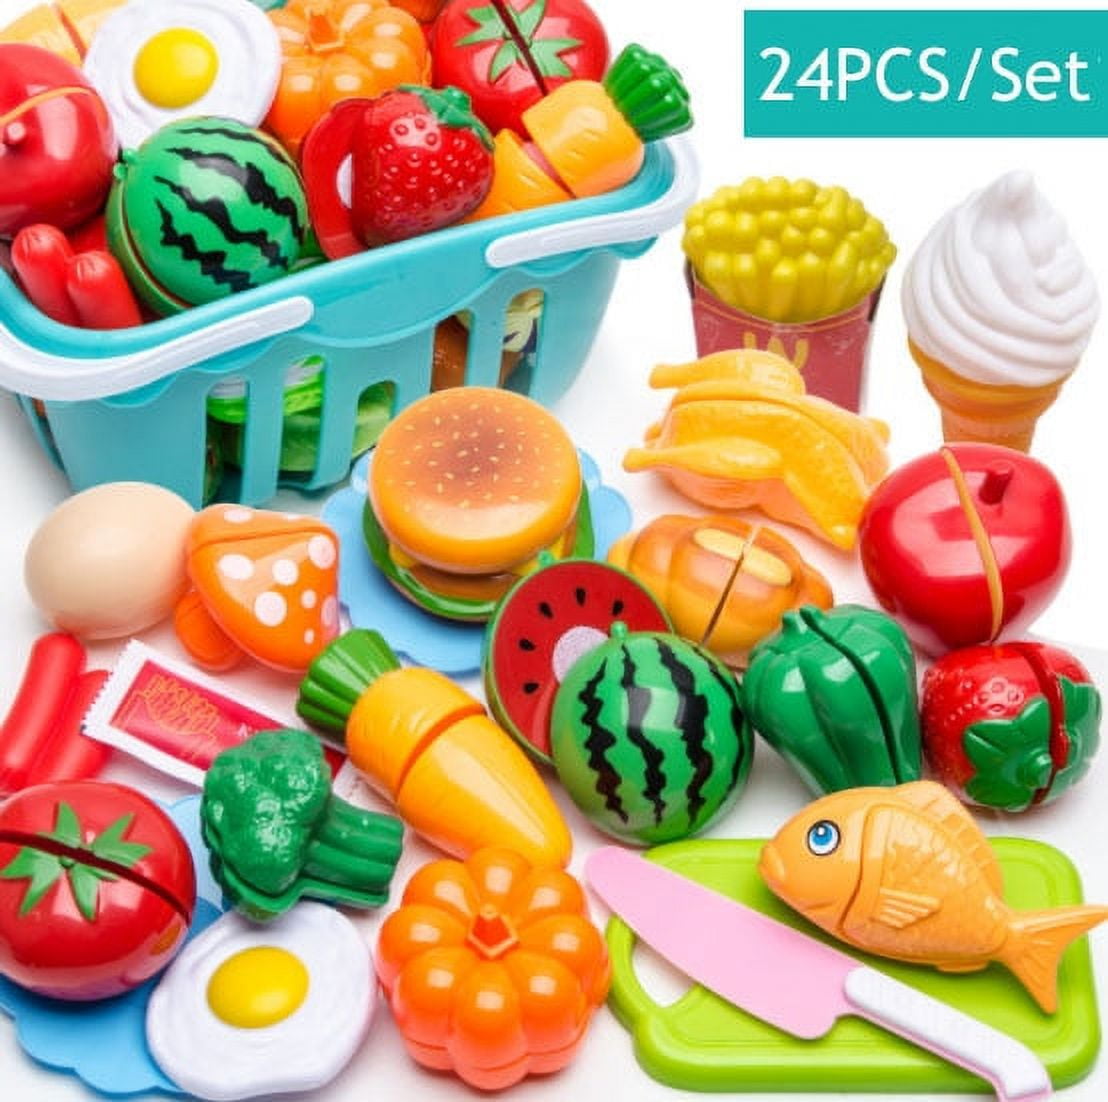 88pcs Cutting Play Food Sets for Kids, Pretend Play Kitchen Toys Accessories Educational Toy Food with Storage Basket